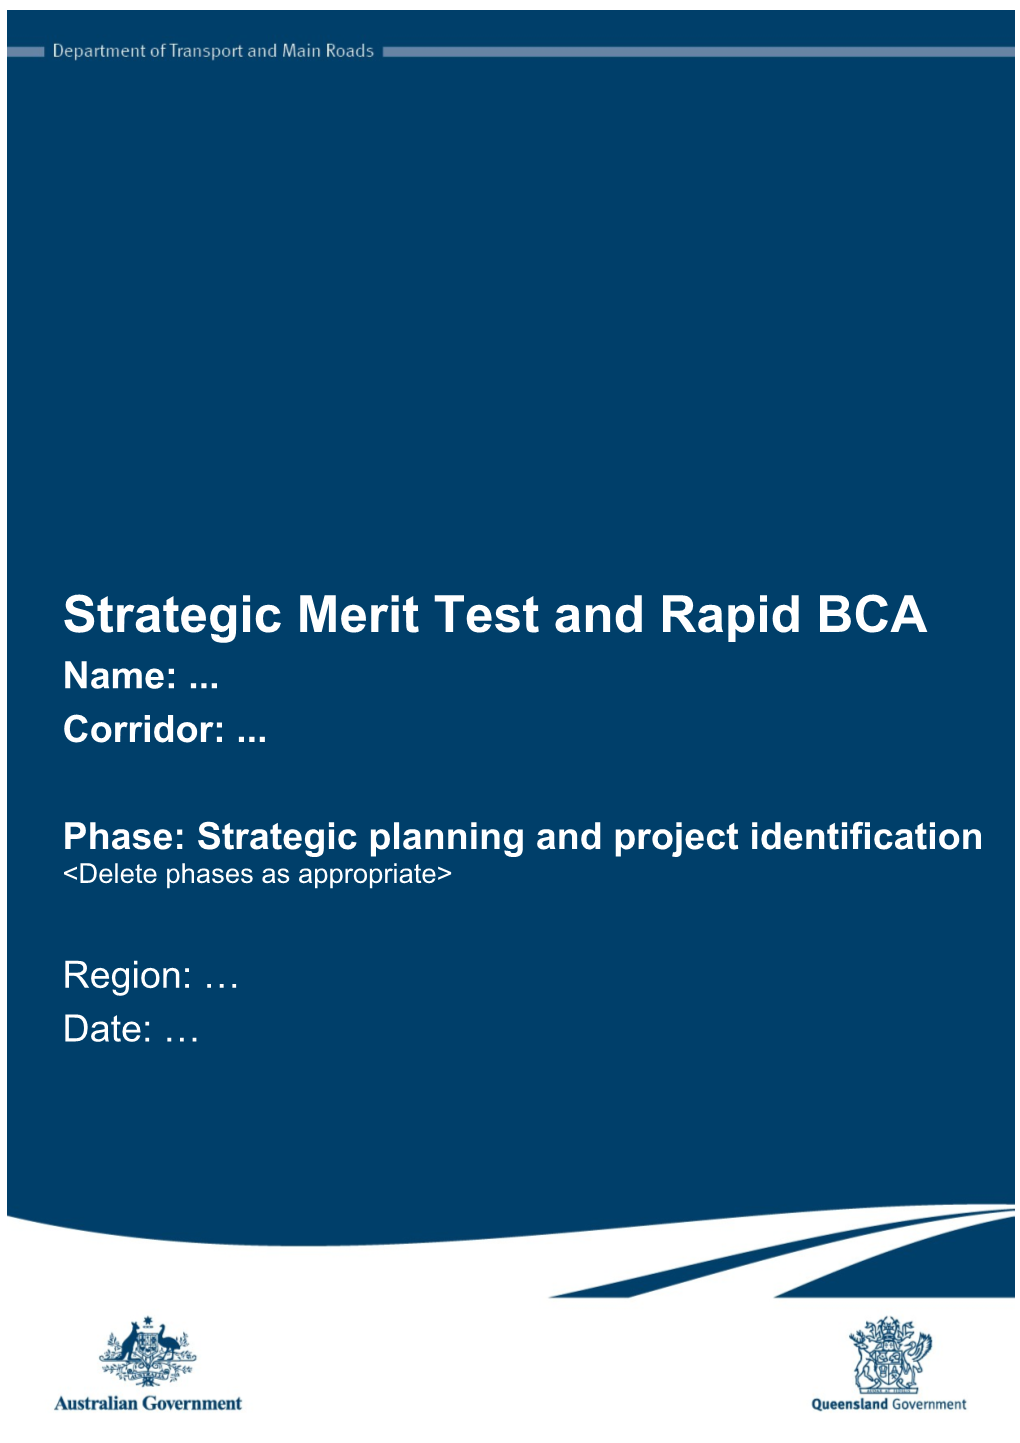 National Projects - Strategic Merit Test and Rapid BCA Template